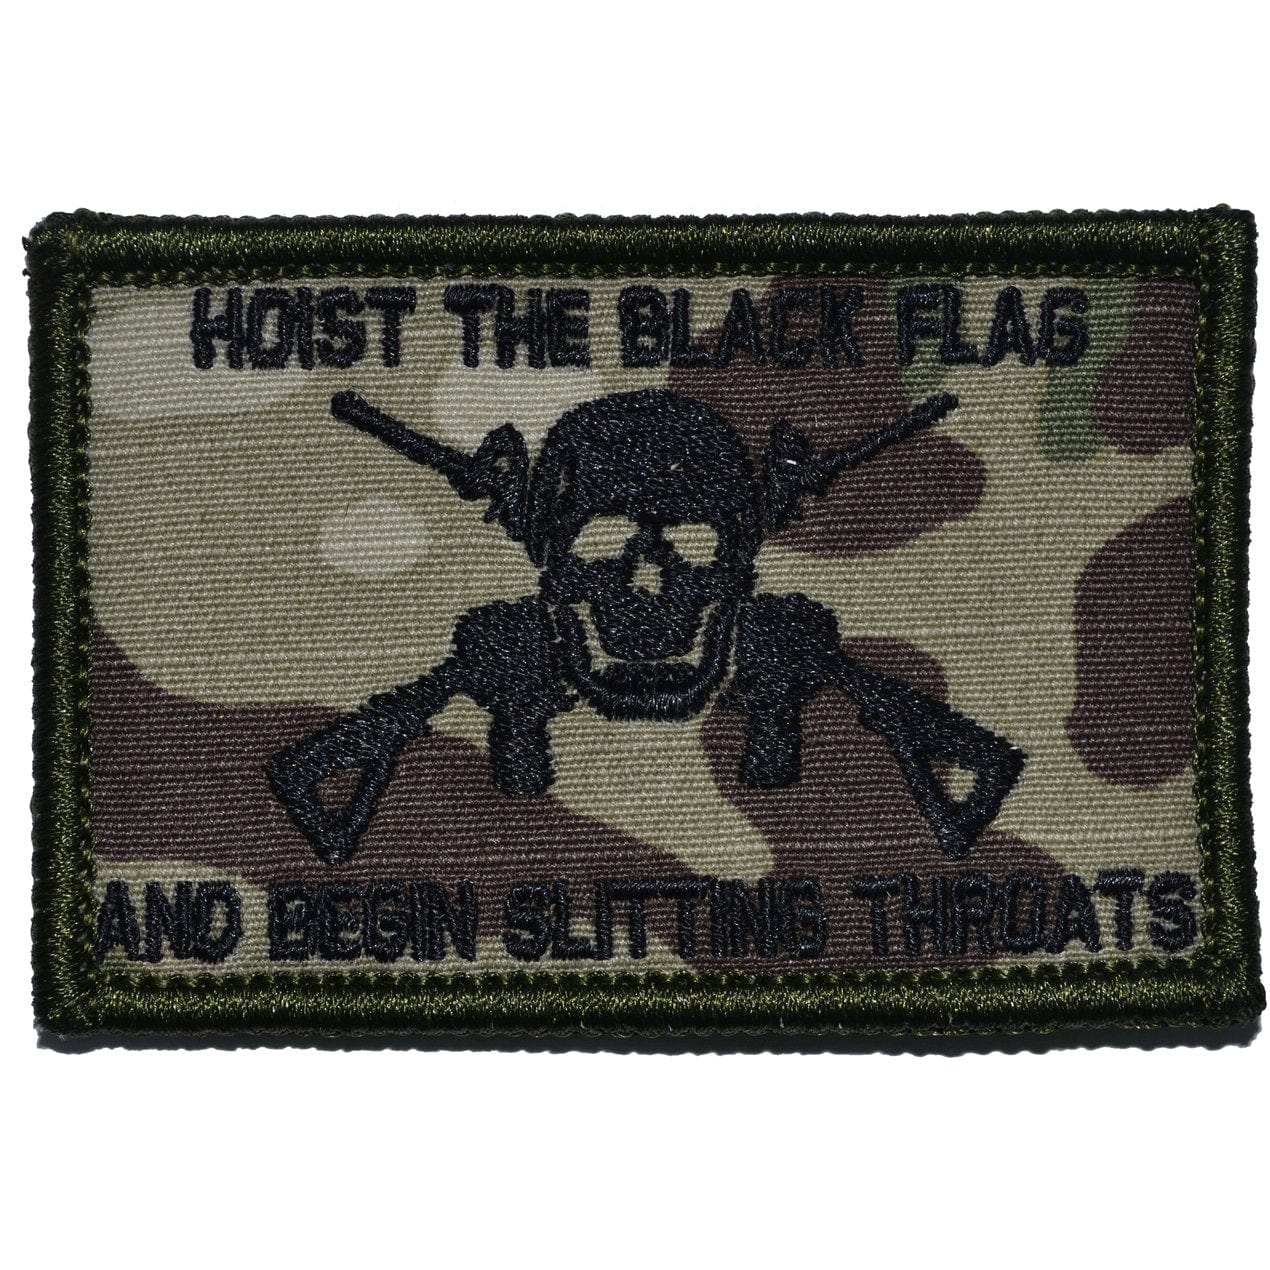 Tactical Gear Junkie Patches MultiCam Hoist The Black Flag and Begin Slitting Throats Jolly Roger - 2x3 Patch